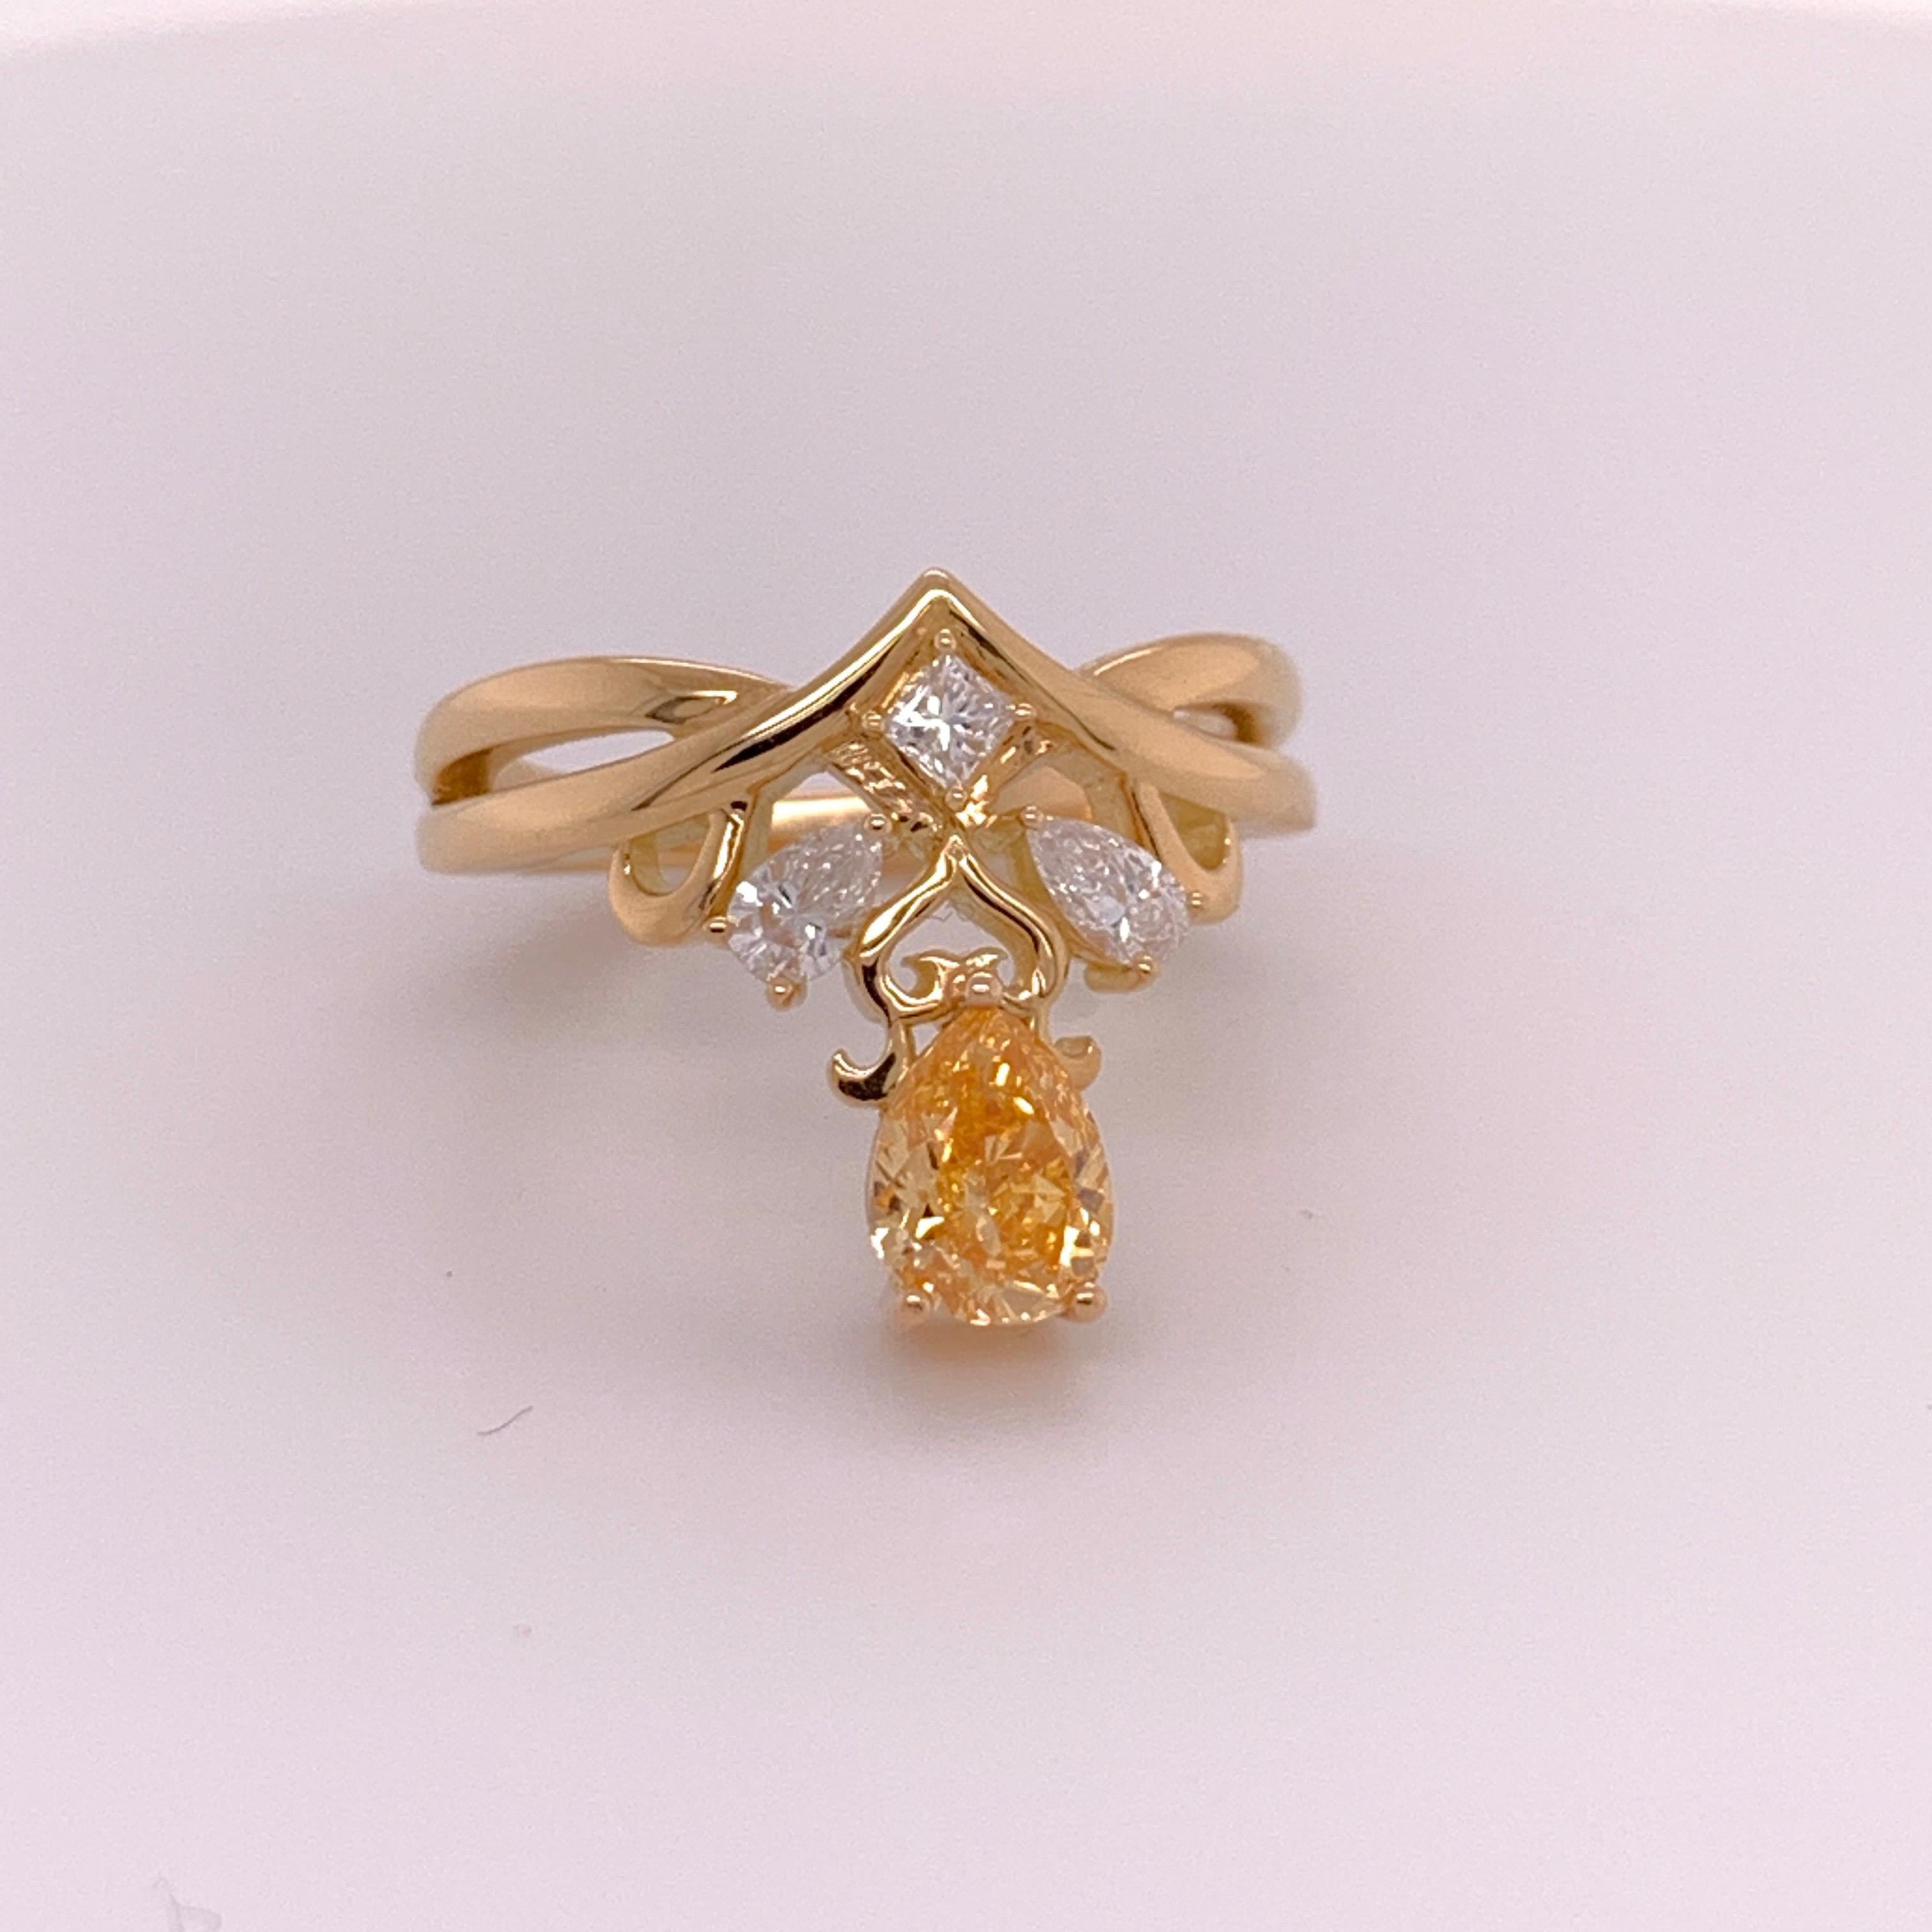 An 18k yellow gold ring set with a GIA certified 0.70ct Pear Shape SI1 Fancy Intense yellowish Orange as well as two pear shaped colorless diamonds and a princess cut weighing approximately 0.45 carats. 

Total weight is 1.15 carat.